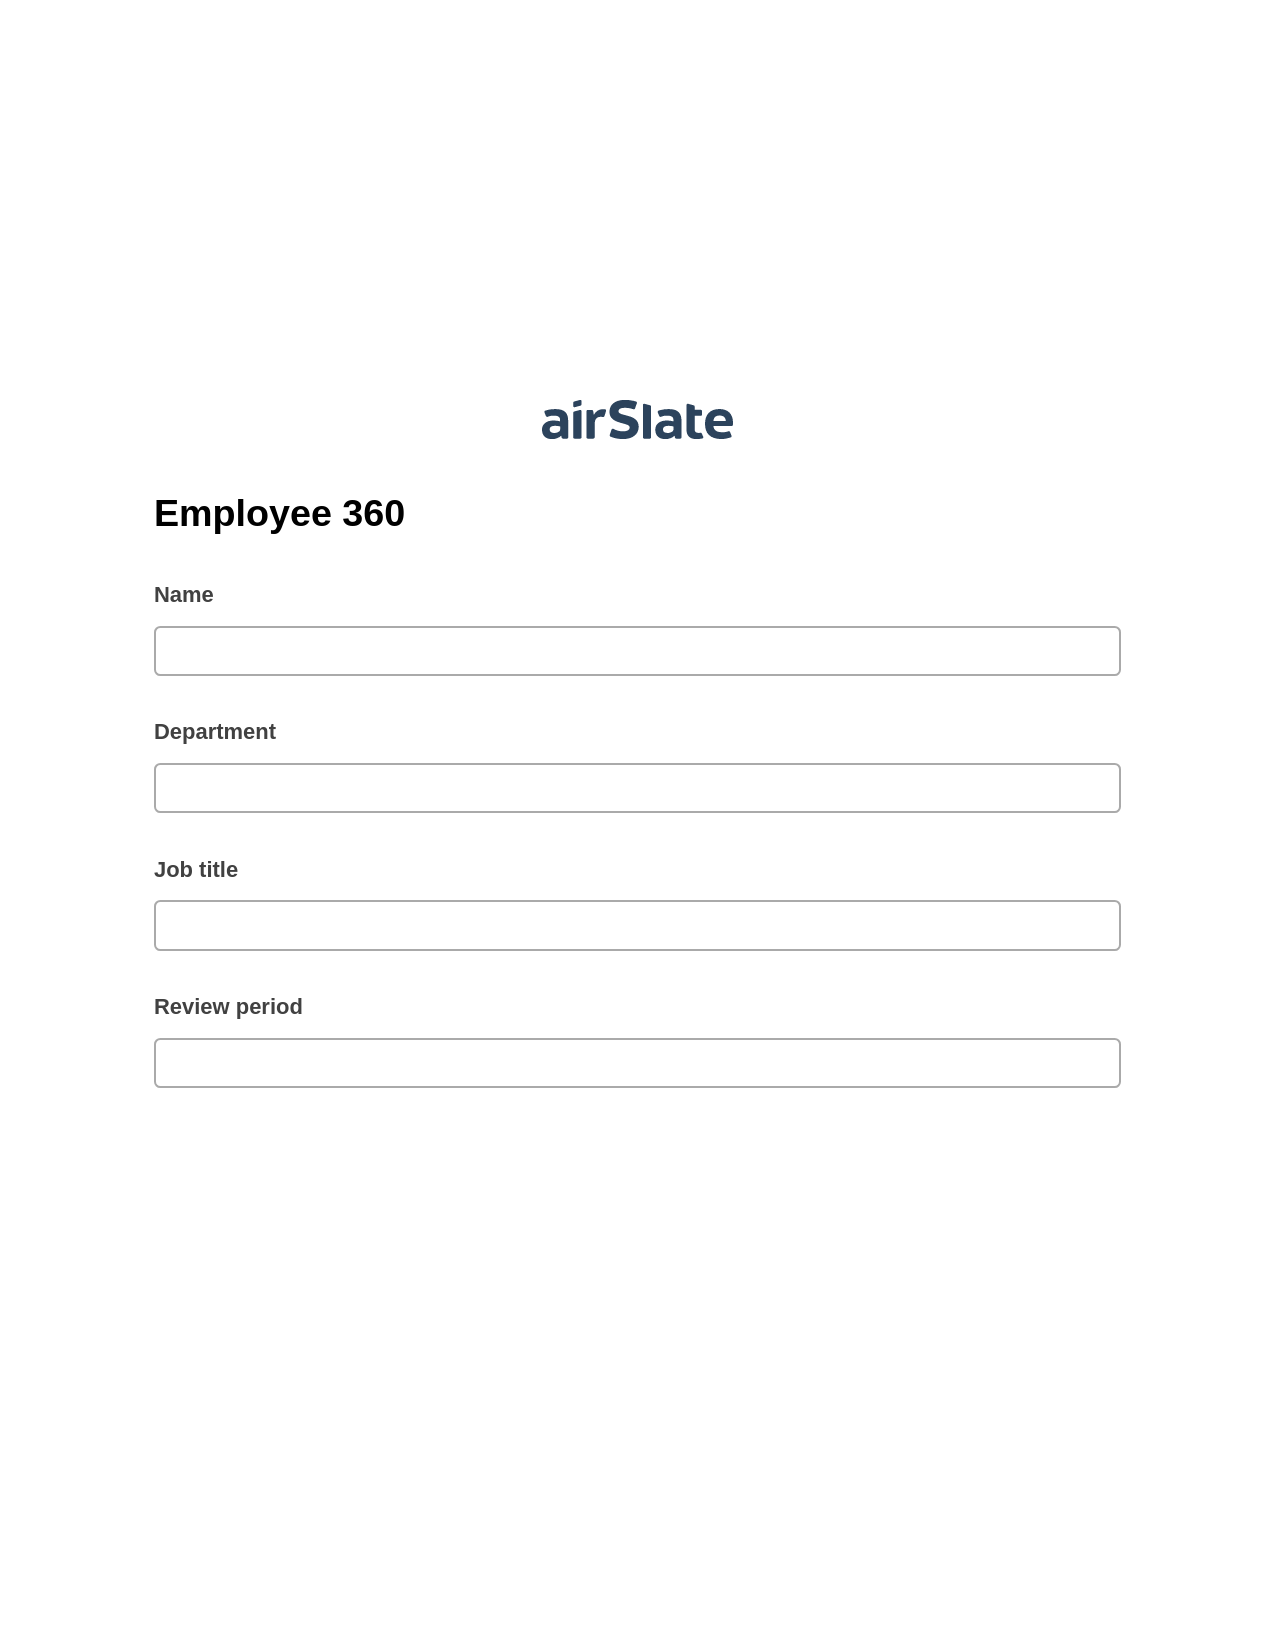 Multirole Employee 360 Pre-fill from another Slate Bot, Create QuickBooks Invoice Bot, Export to Google Sheet Bot